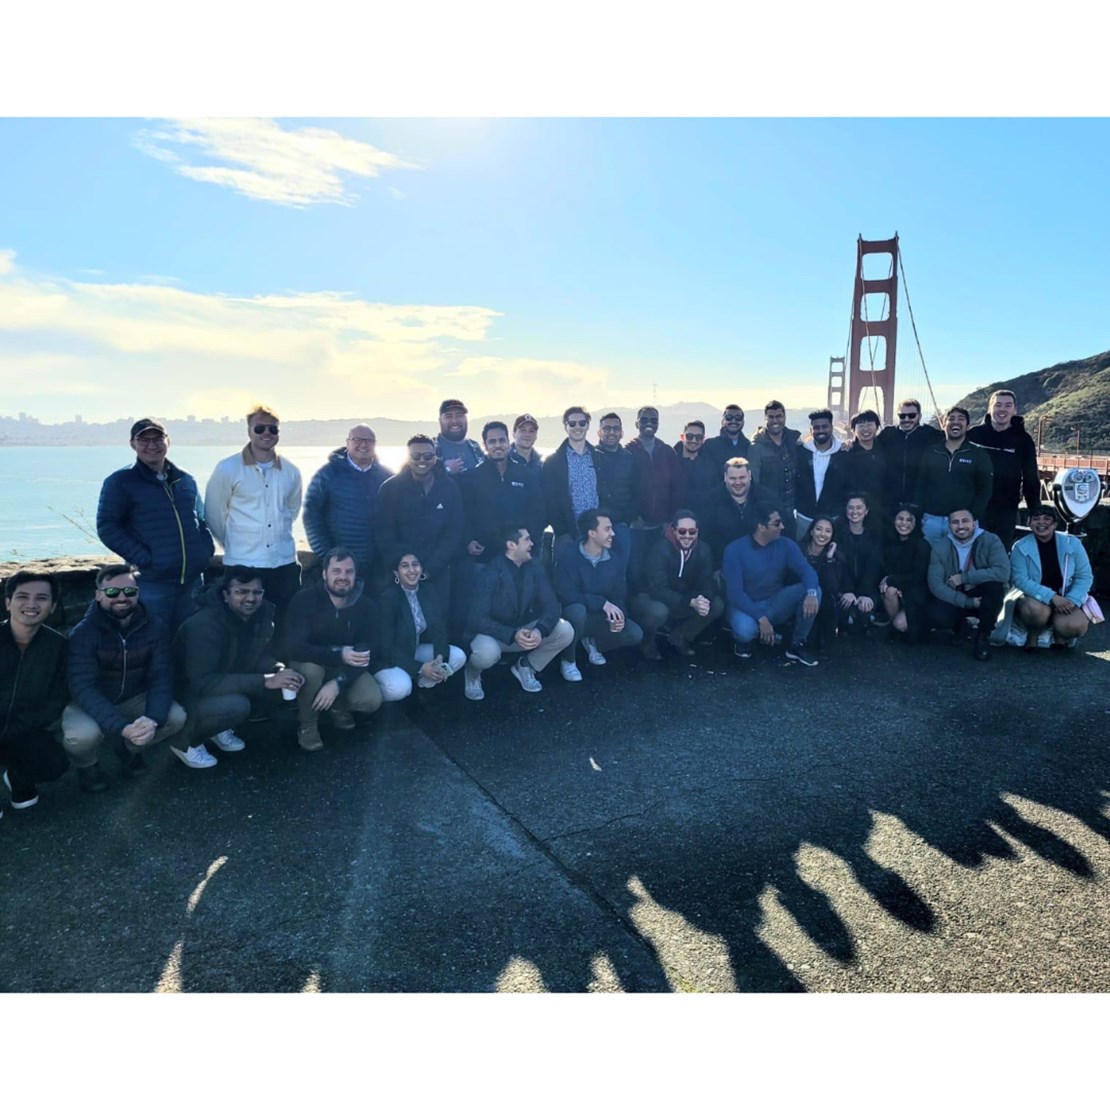 Group photo in front of the Golden Gate Bridge